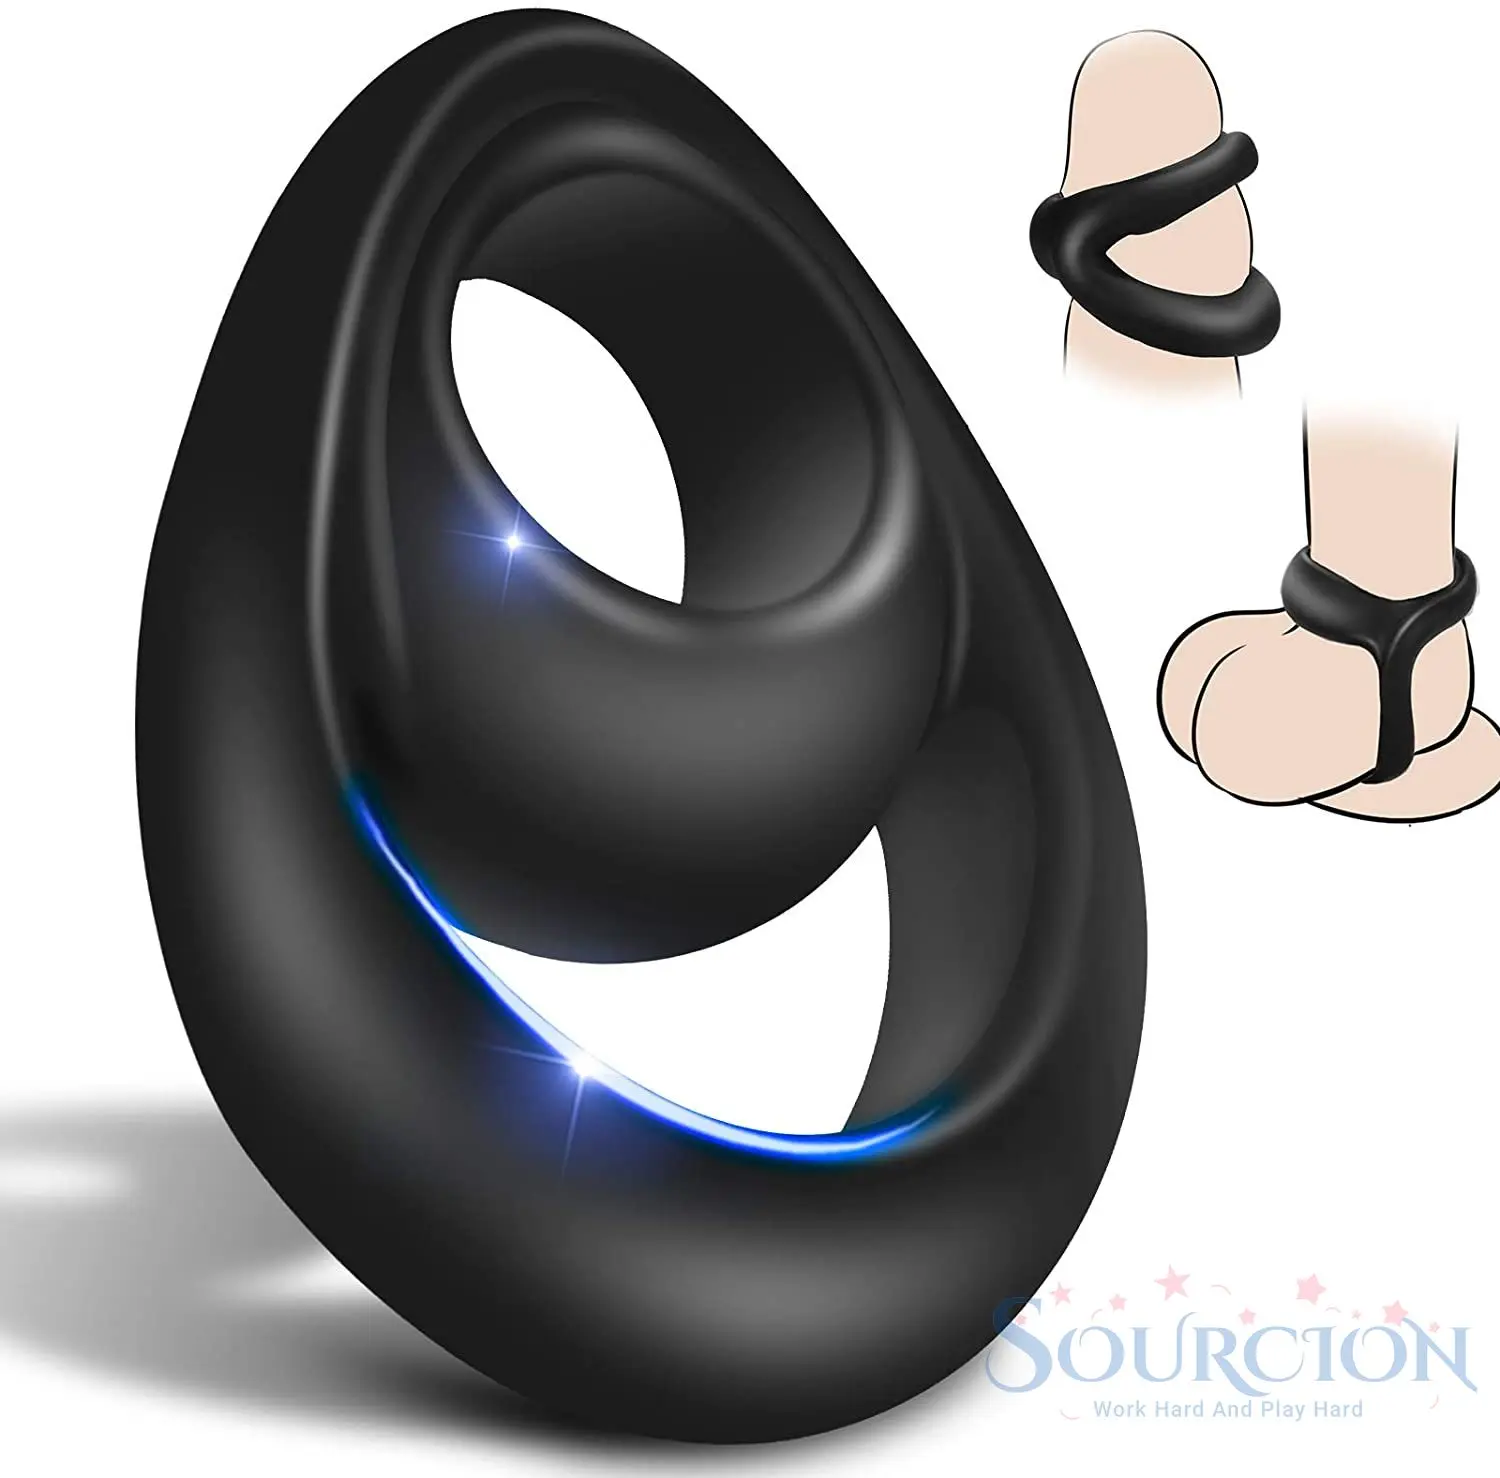 

Sourcion New Cockring Cock Ring Dual Penis Ring Scrotum Stretcher Dick Enlarger Rings Silicone Ejaculation Delay Sex Toy for Men